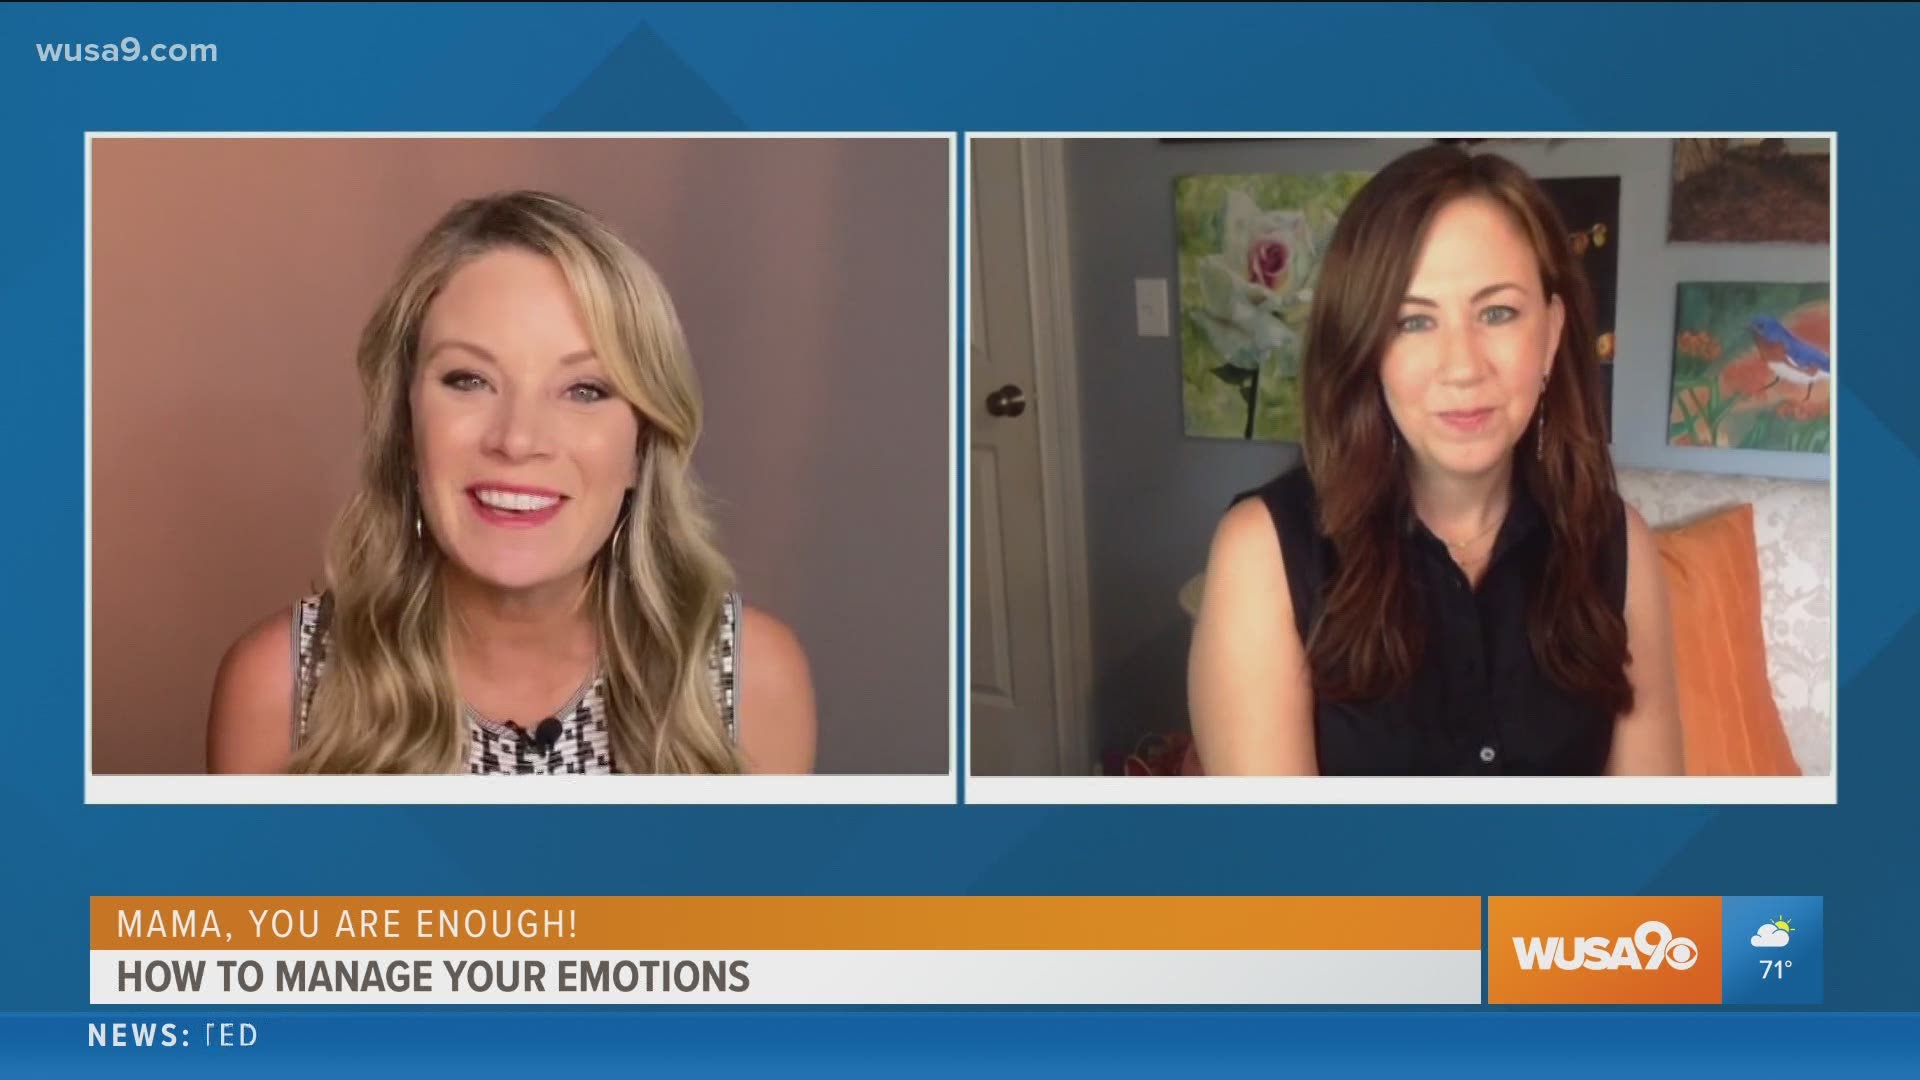 Dr. Claire Nicogossian, author and therapist offers some tips on managing your emotions during trying times.